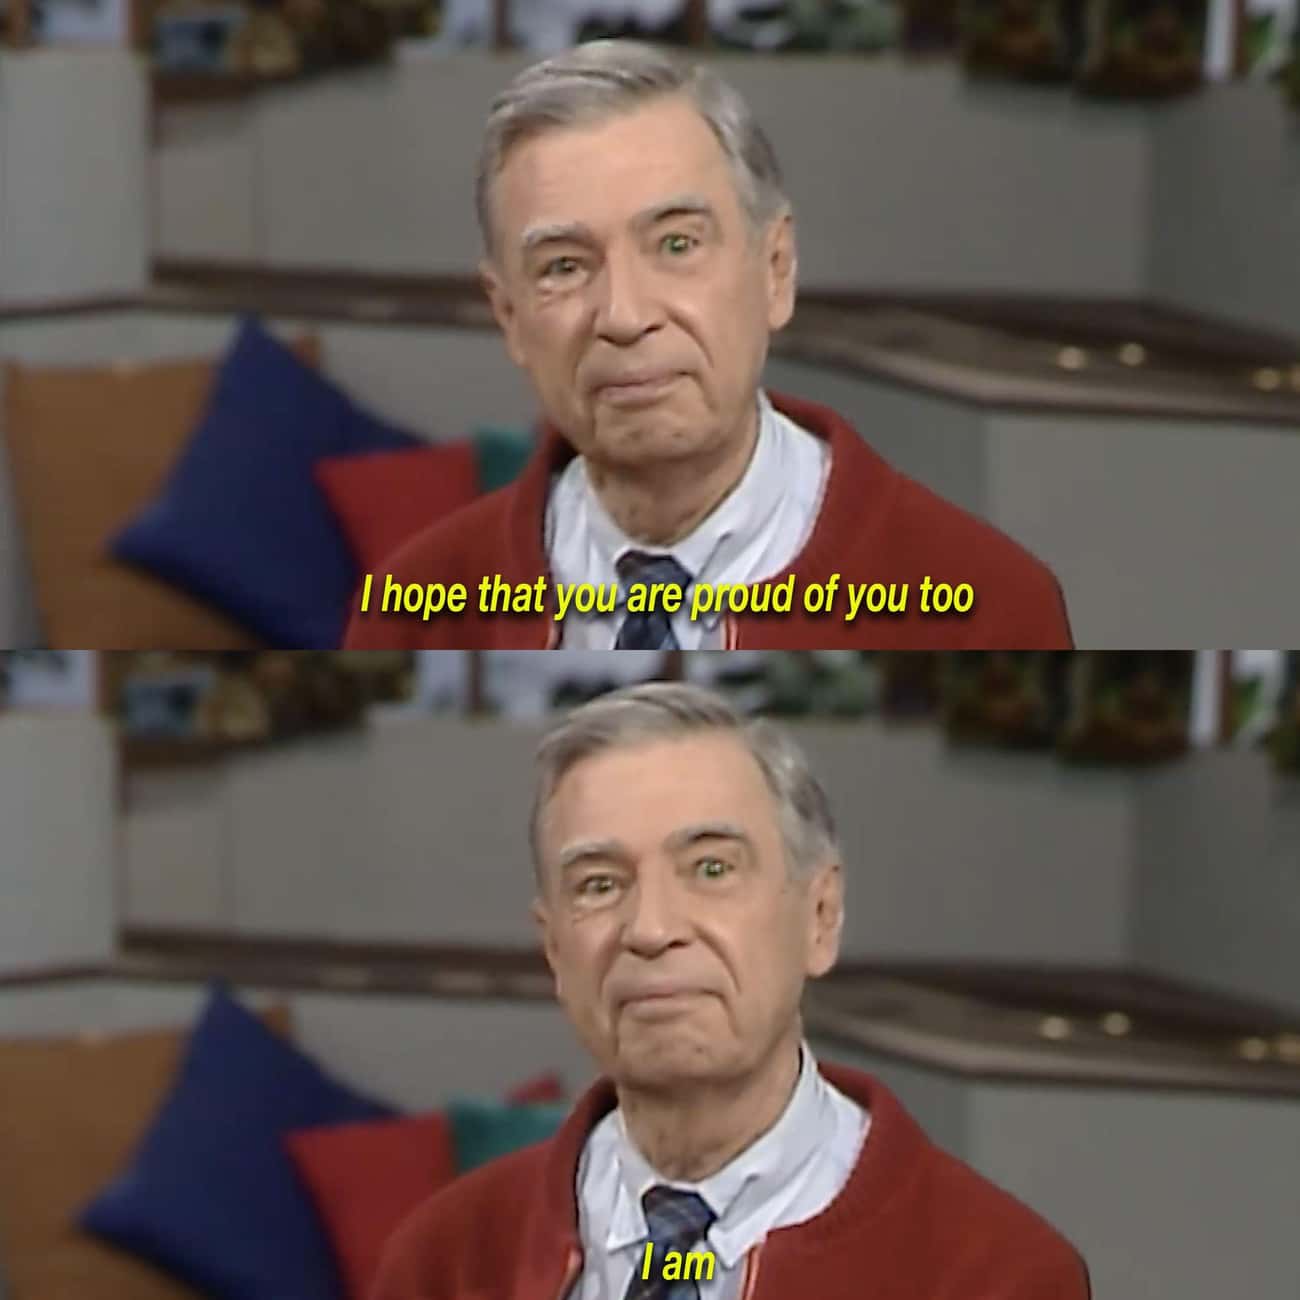  In ‘Mister Rogers’ Neighborhood,’ Fred Rogers Gives A Final Affirmation